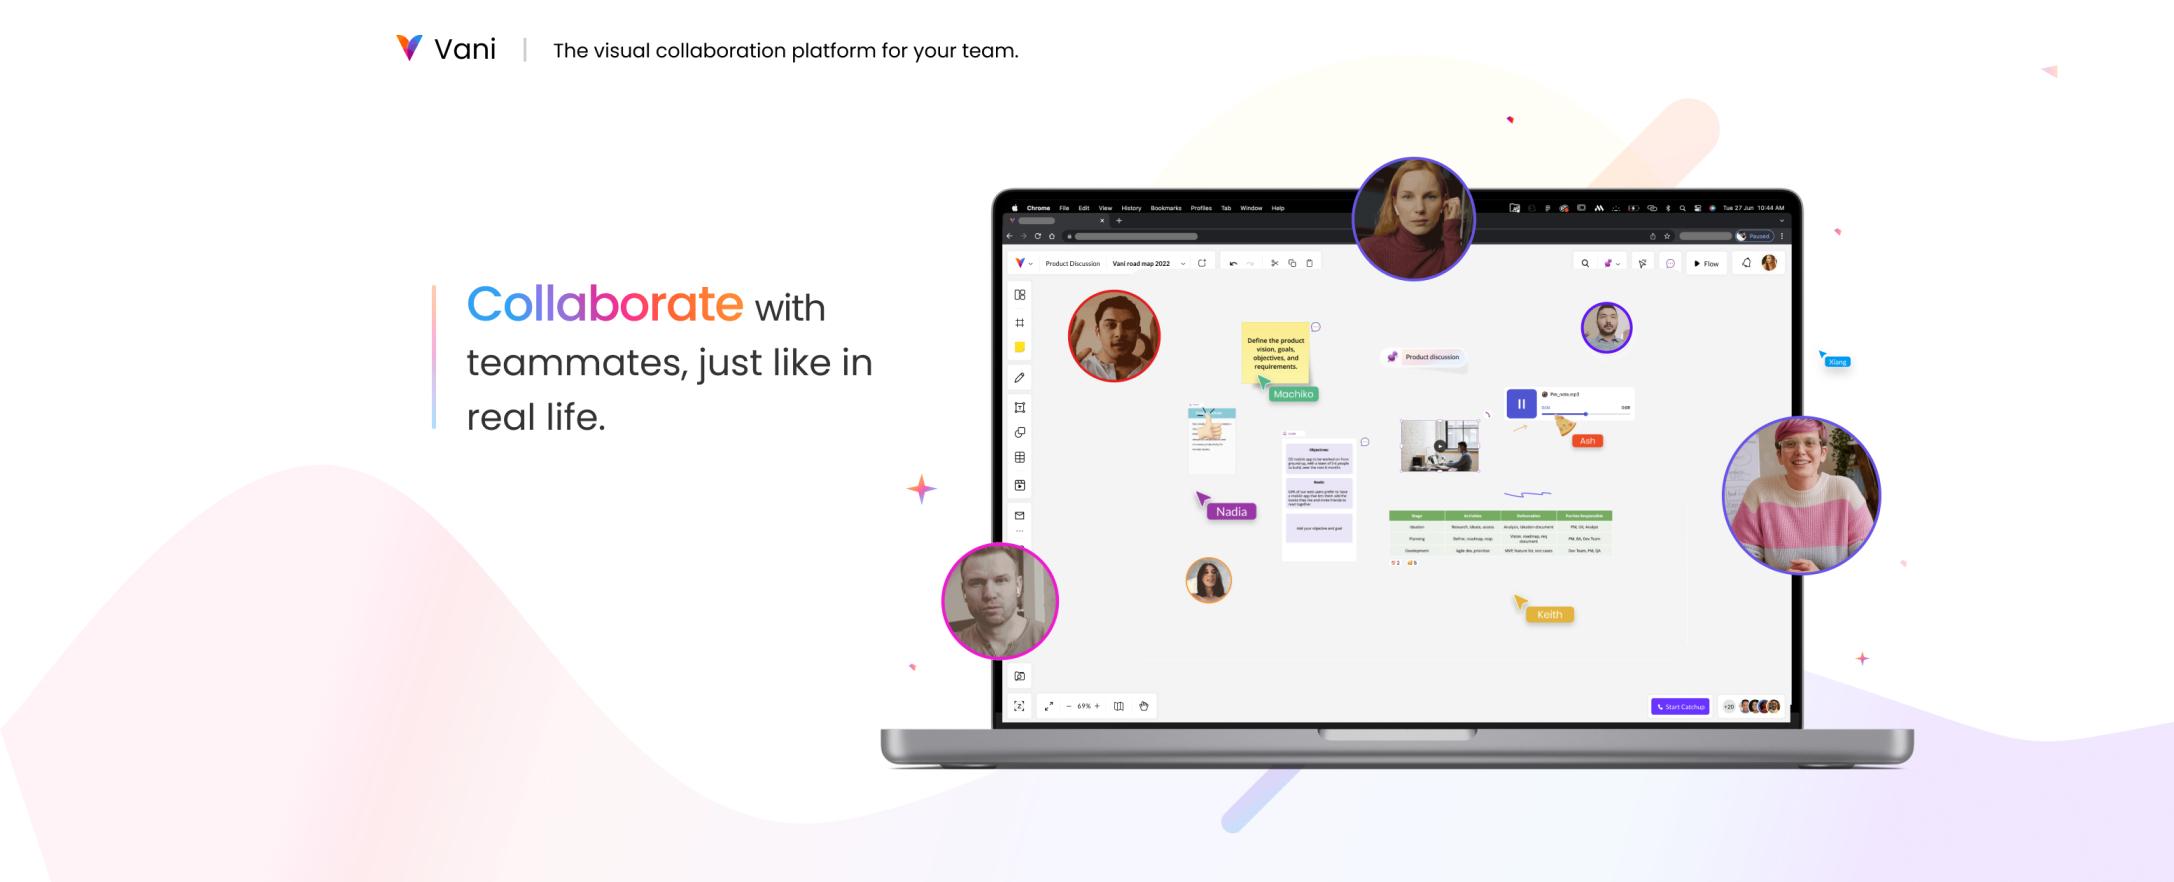 Vani - Collaborate with teammates, just like in real life